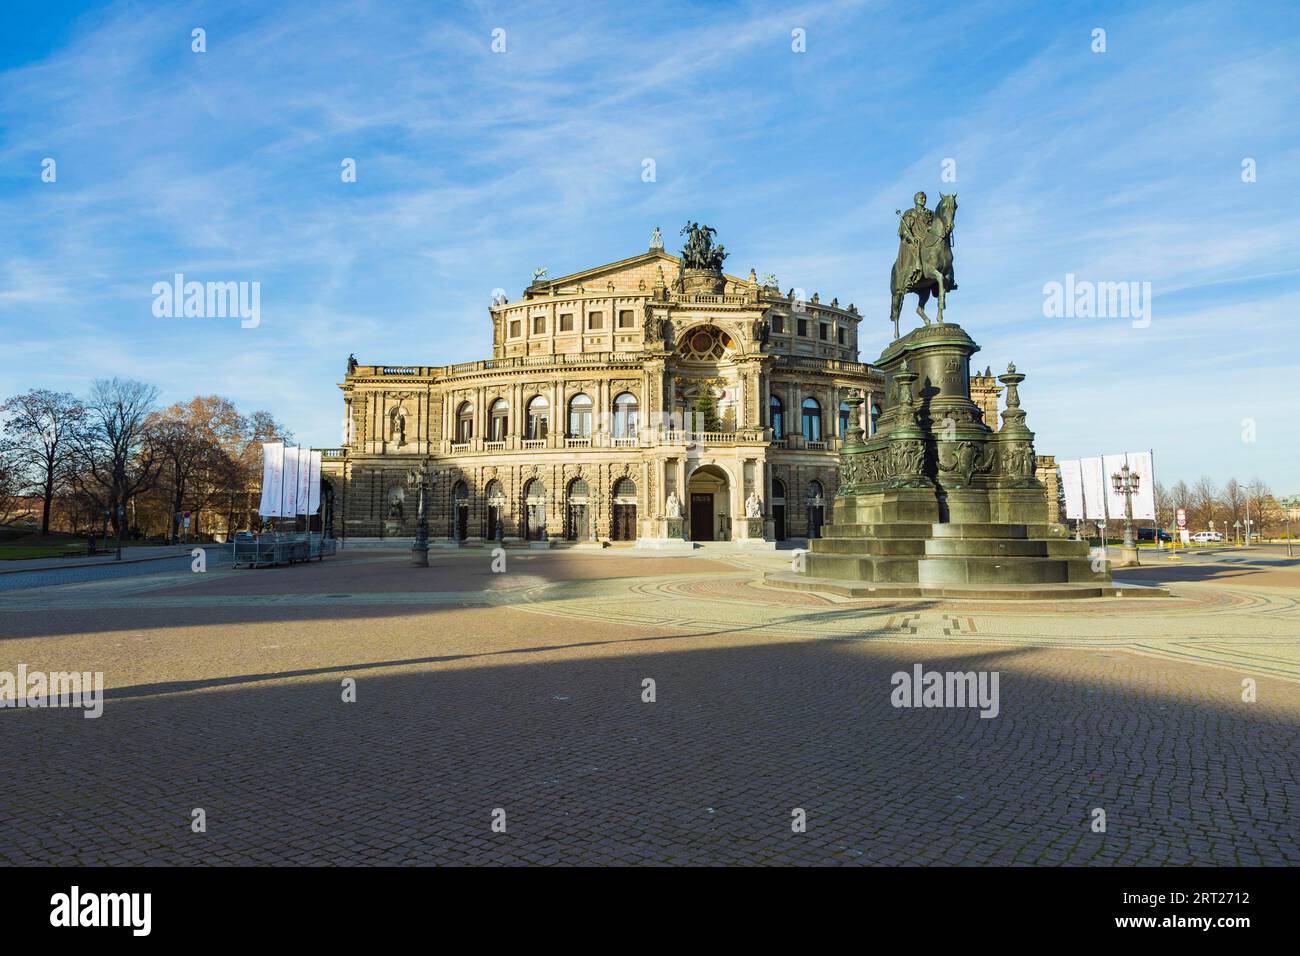 First day of complete lockdown due to rising corona infection numbers in Dresden city centre. Empty theatre square Stock Photo